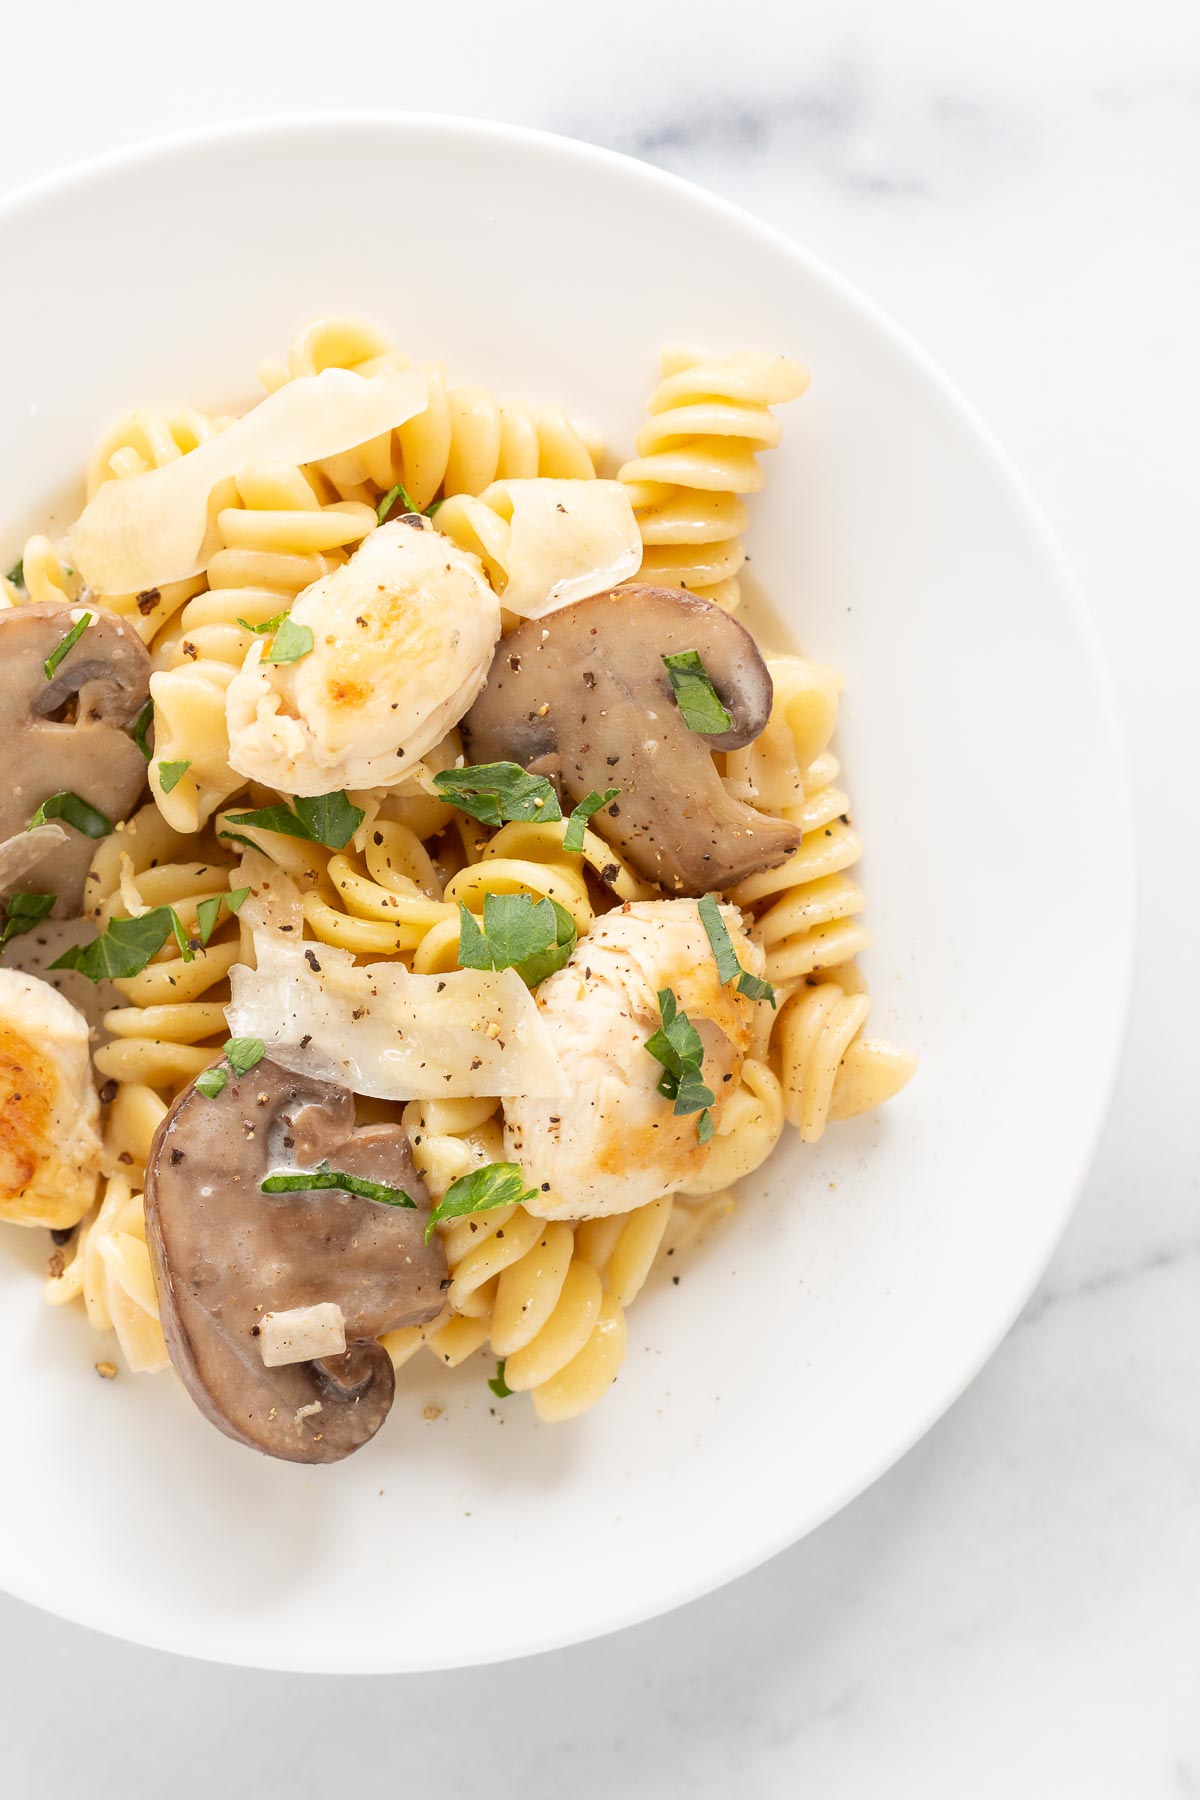 A plate of chicken mushroom pasta with scallops and chopped herbs, served on a white background.